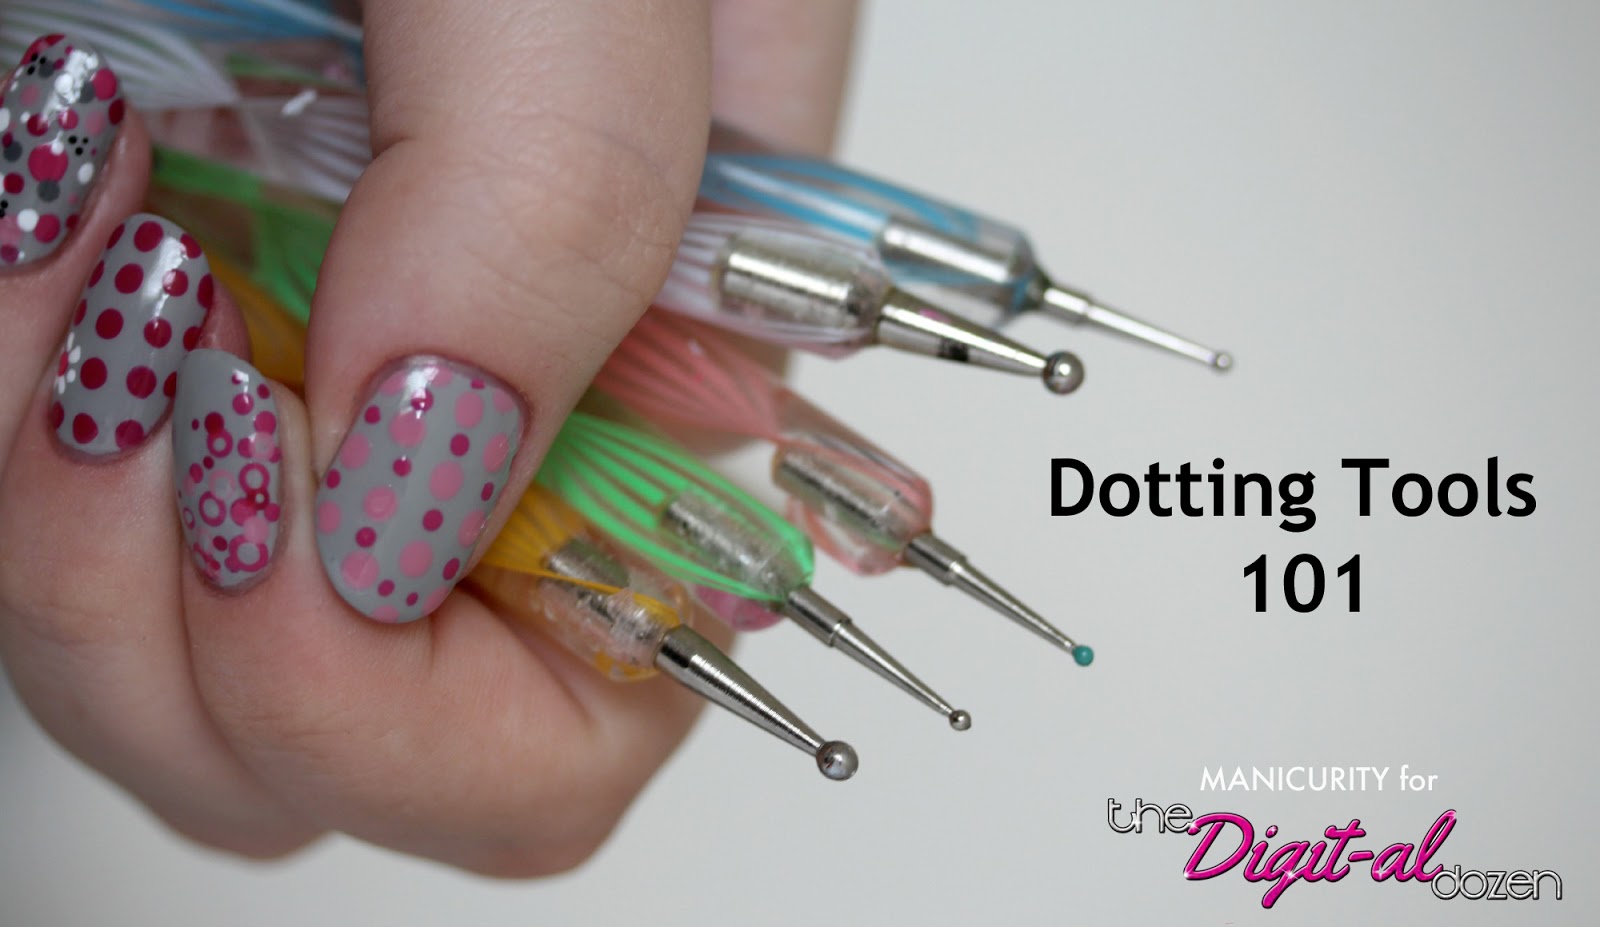 9. Nail Art Dotting and Painting Pen Set with Rhinestone Picker - wide 1